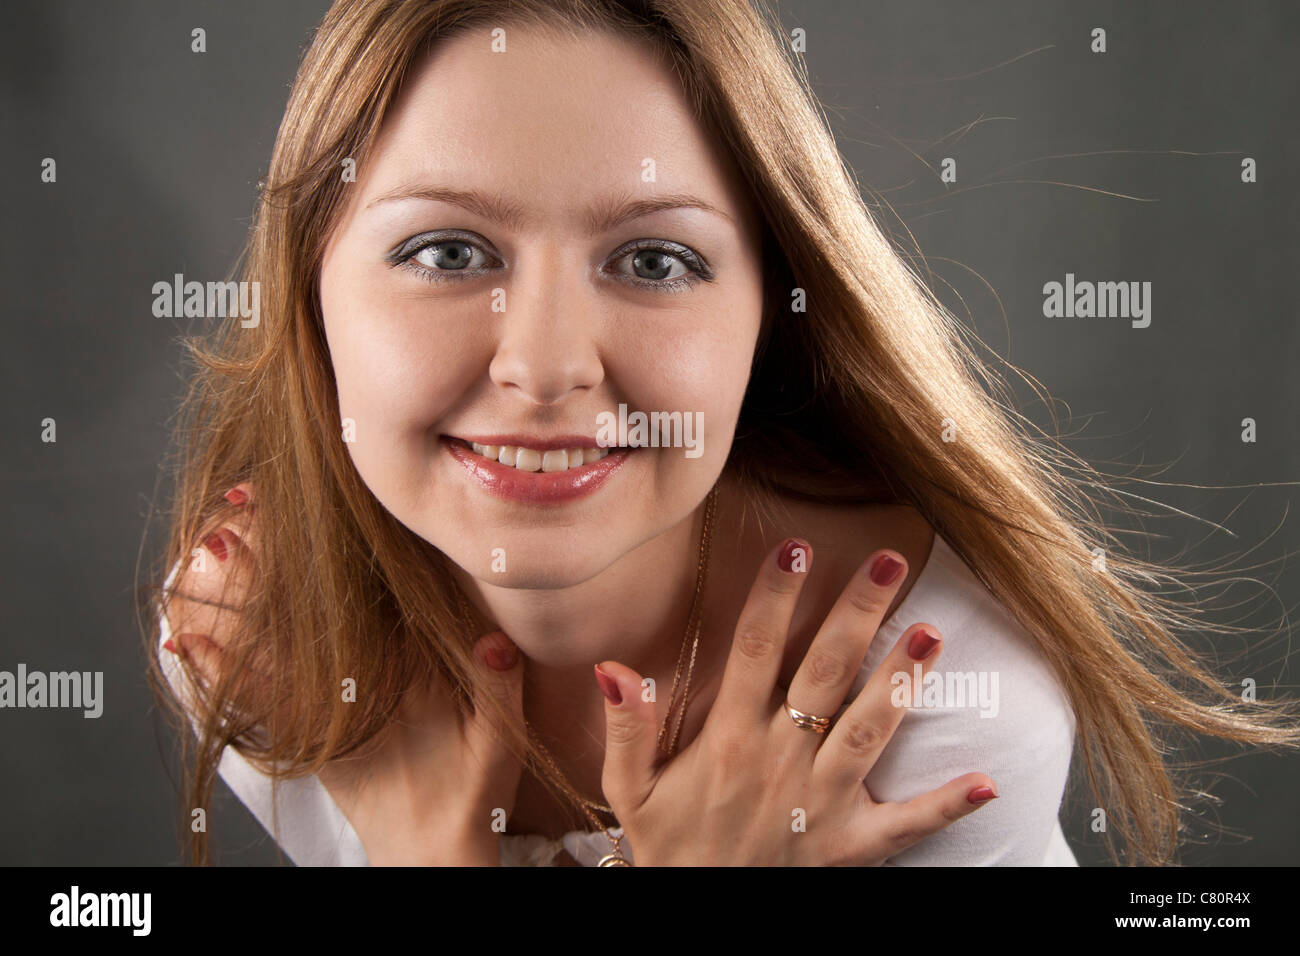 Beautiful woman smiles on a grey background Stock Photo